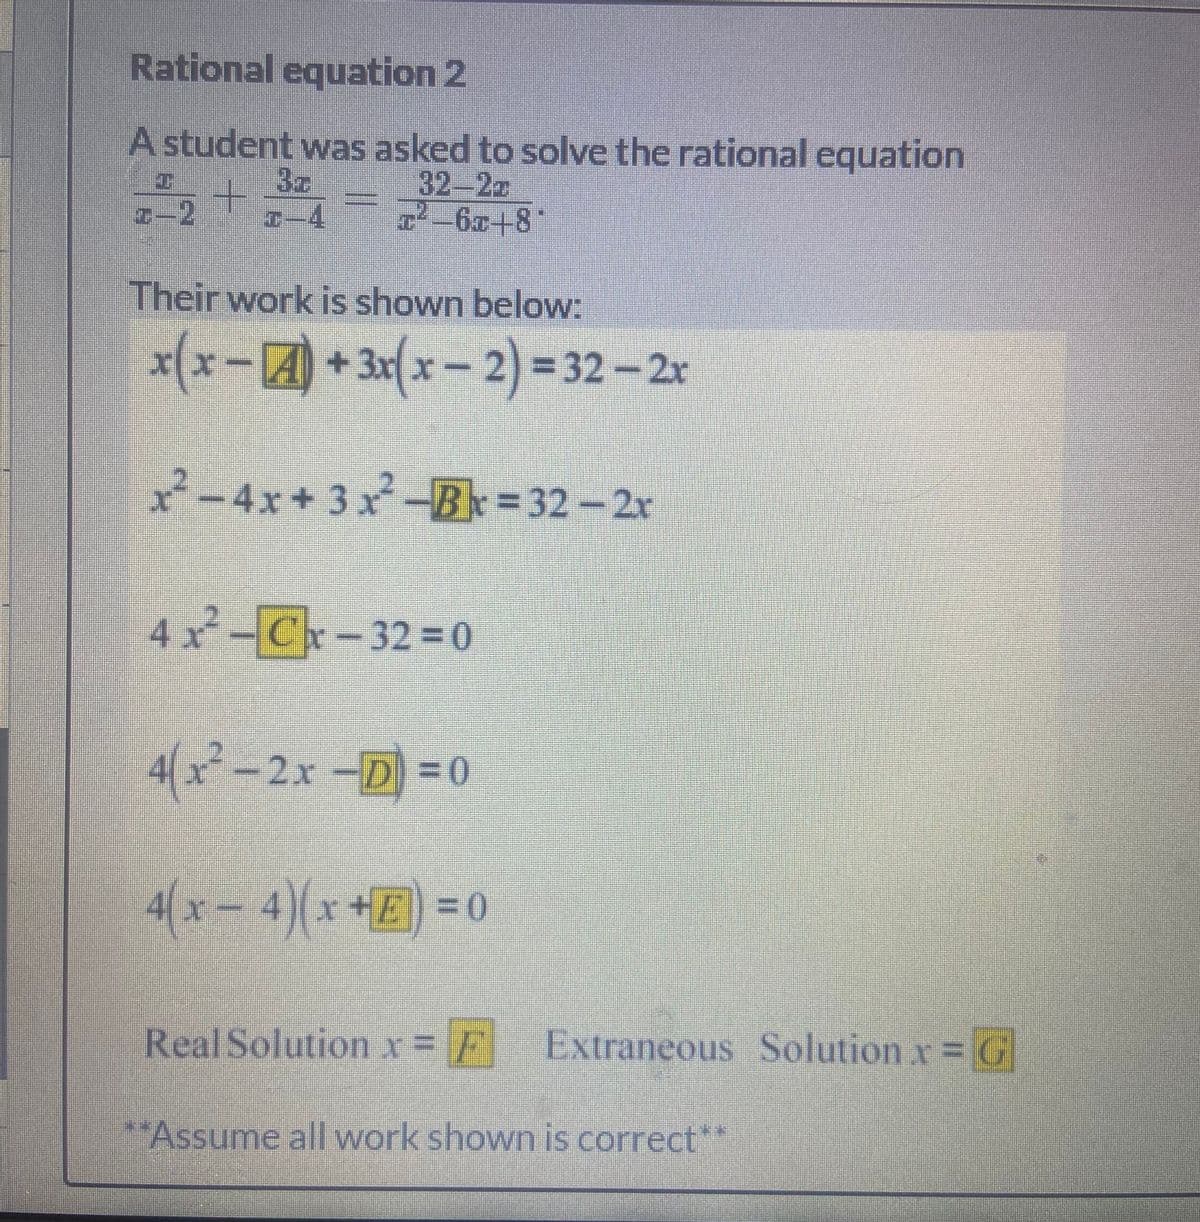 Rational equation 2
A student was asked to solve the rational equation
3c
32-22
-6x+8*
Their work is shown below:
x(x-+3x(x-2) = 32-2r
2-4x+3x-B= 32-2r
4x-Cx-32%=0
4(x-2x-D =0
4(x-4)(x+E) = 0
Real Solution x= Extraneous Solution x= G
"Assume all work shown is correct**
